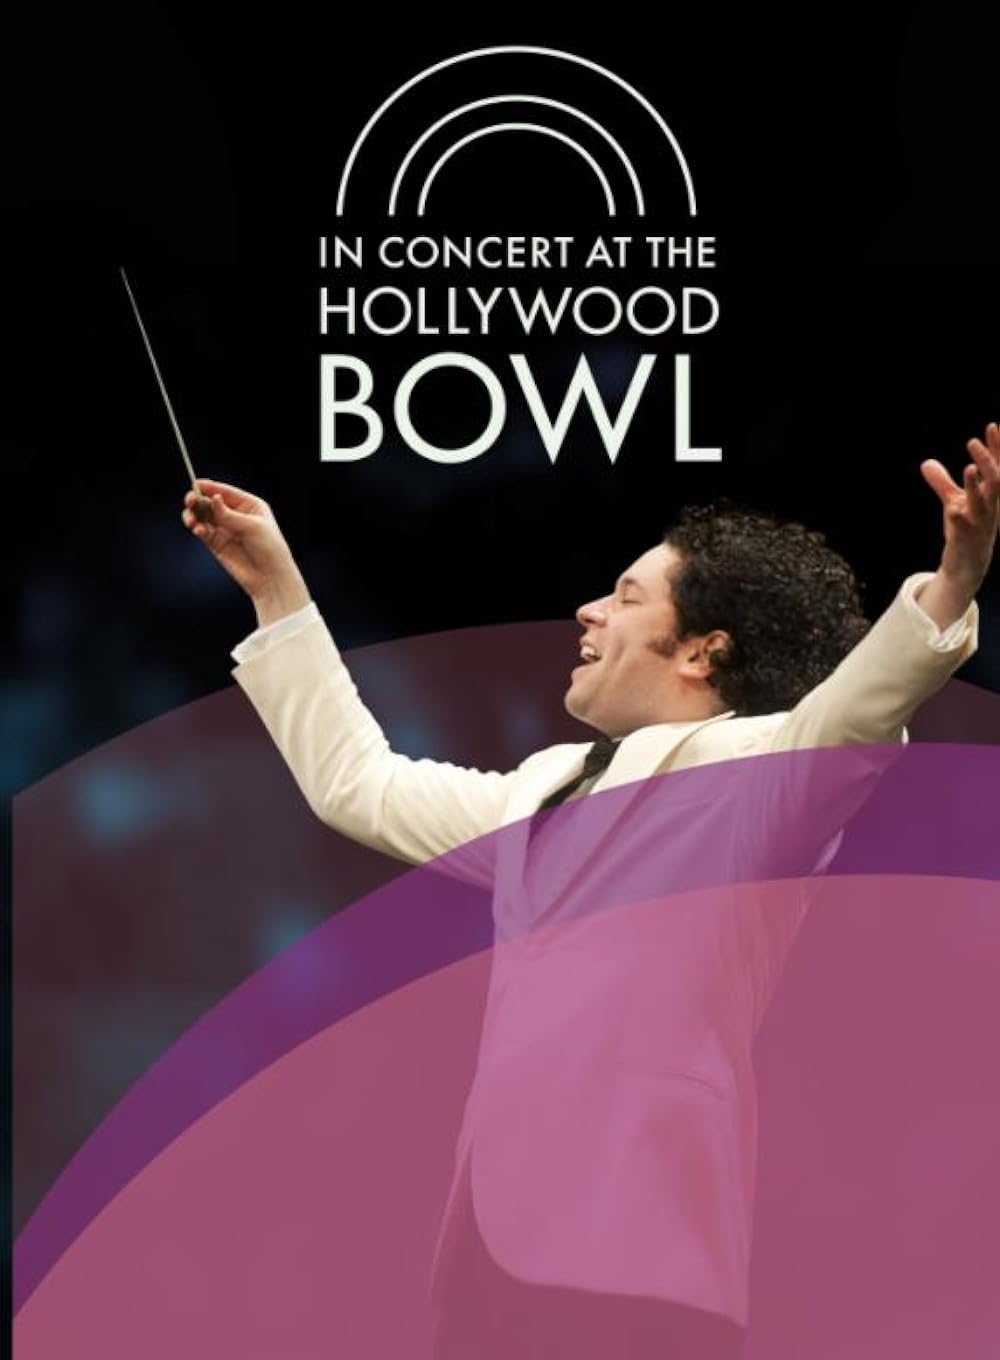 In Concert at the Hollywood Bowl